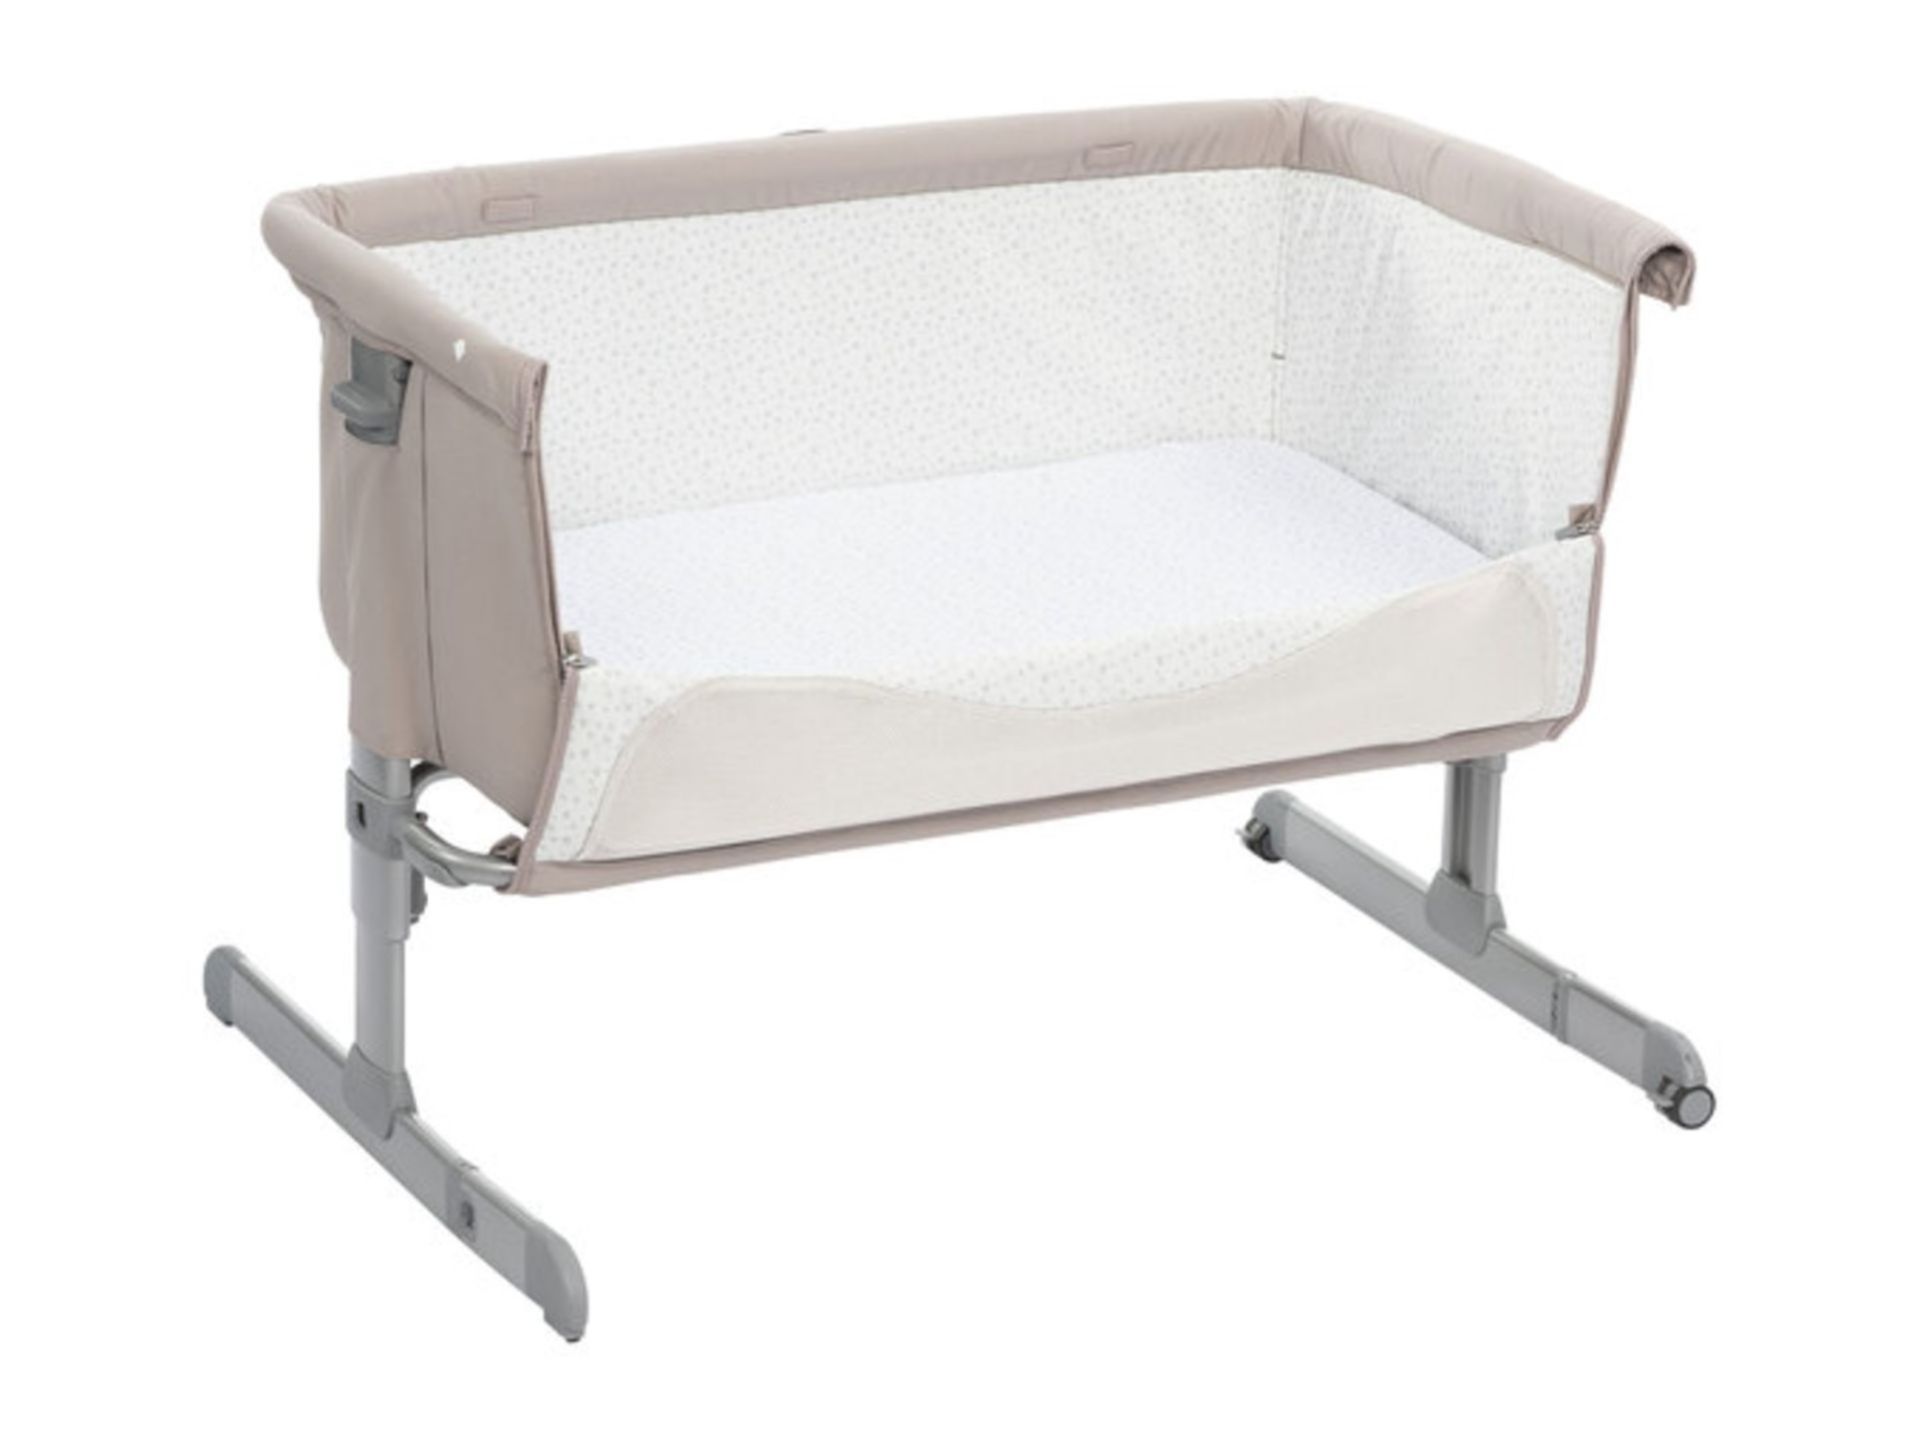 1 x Chicco Next2me Chick to Chick Bedside Baby Crib - Brand New 2019 Sealed Stock - Includes - Image 2 of 5